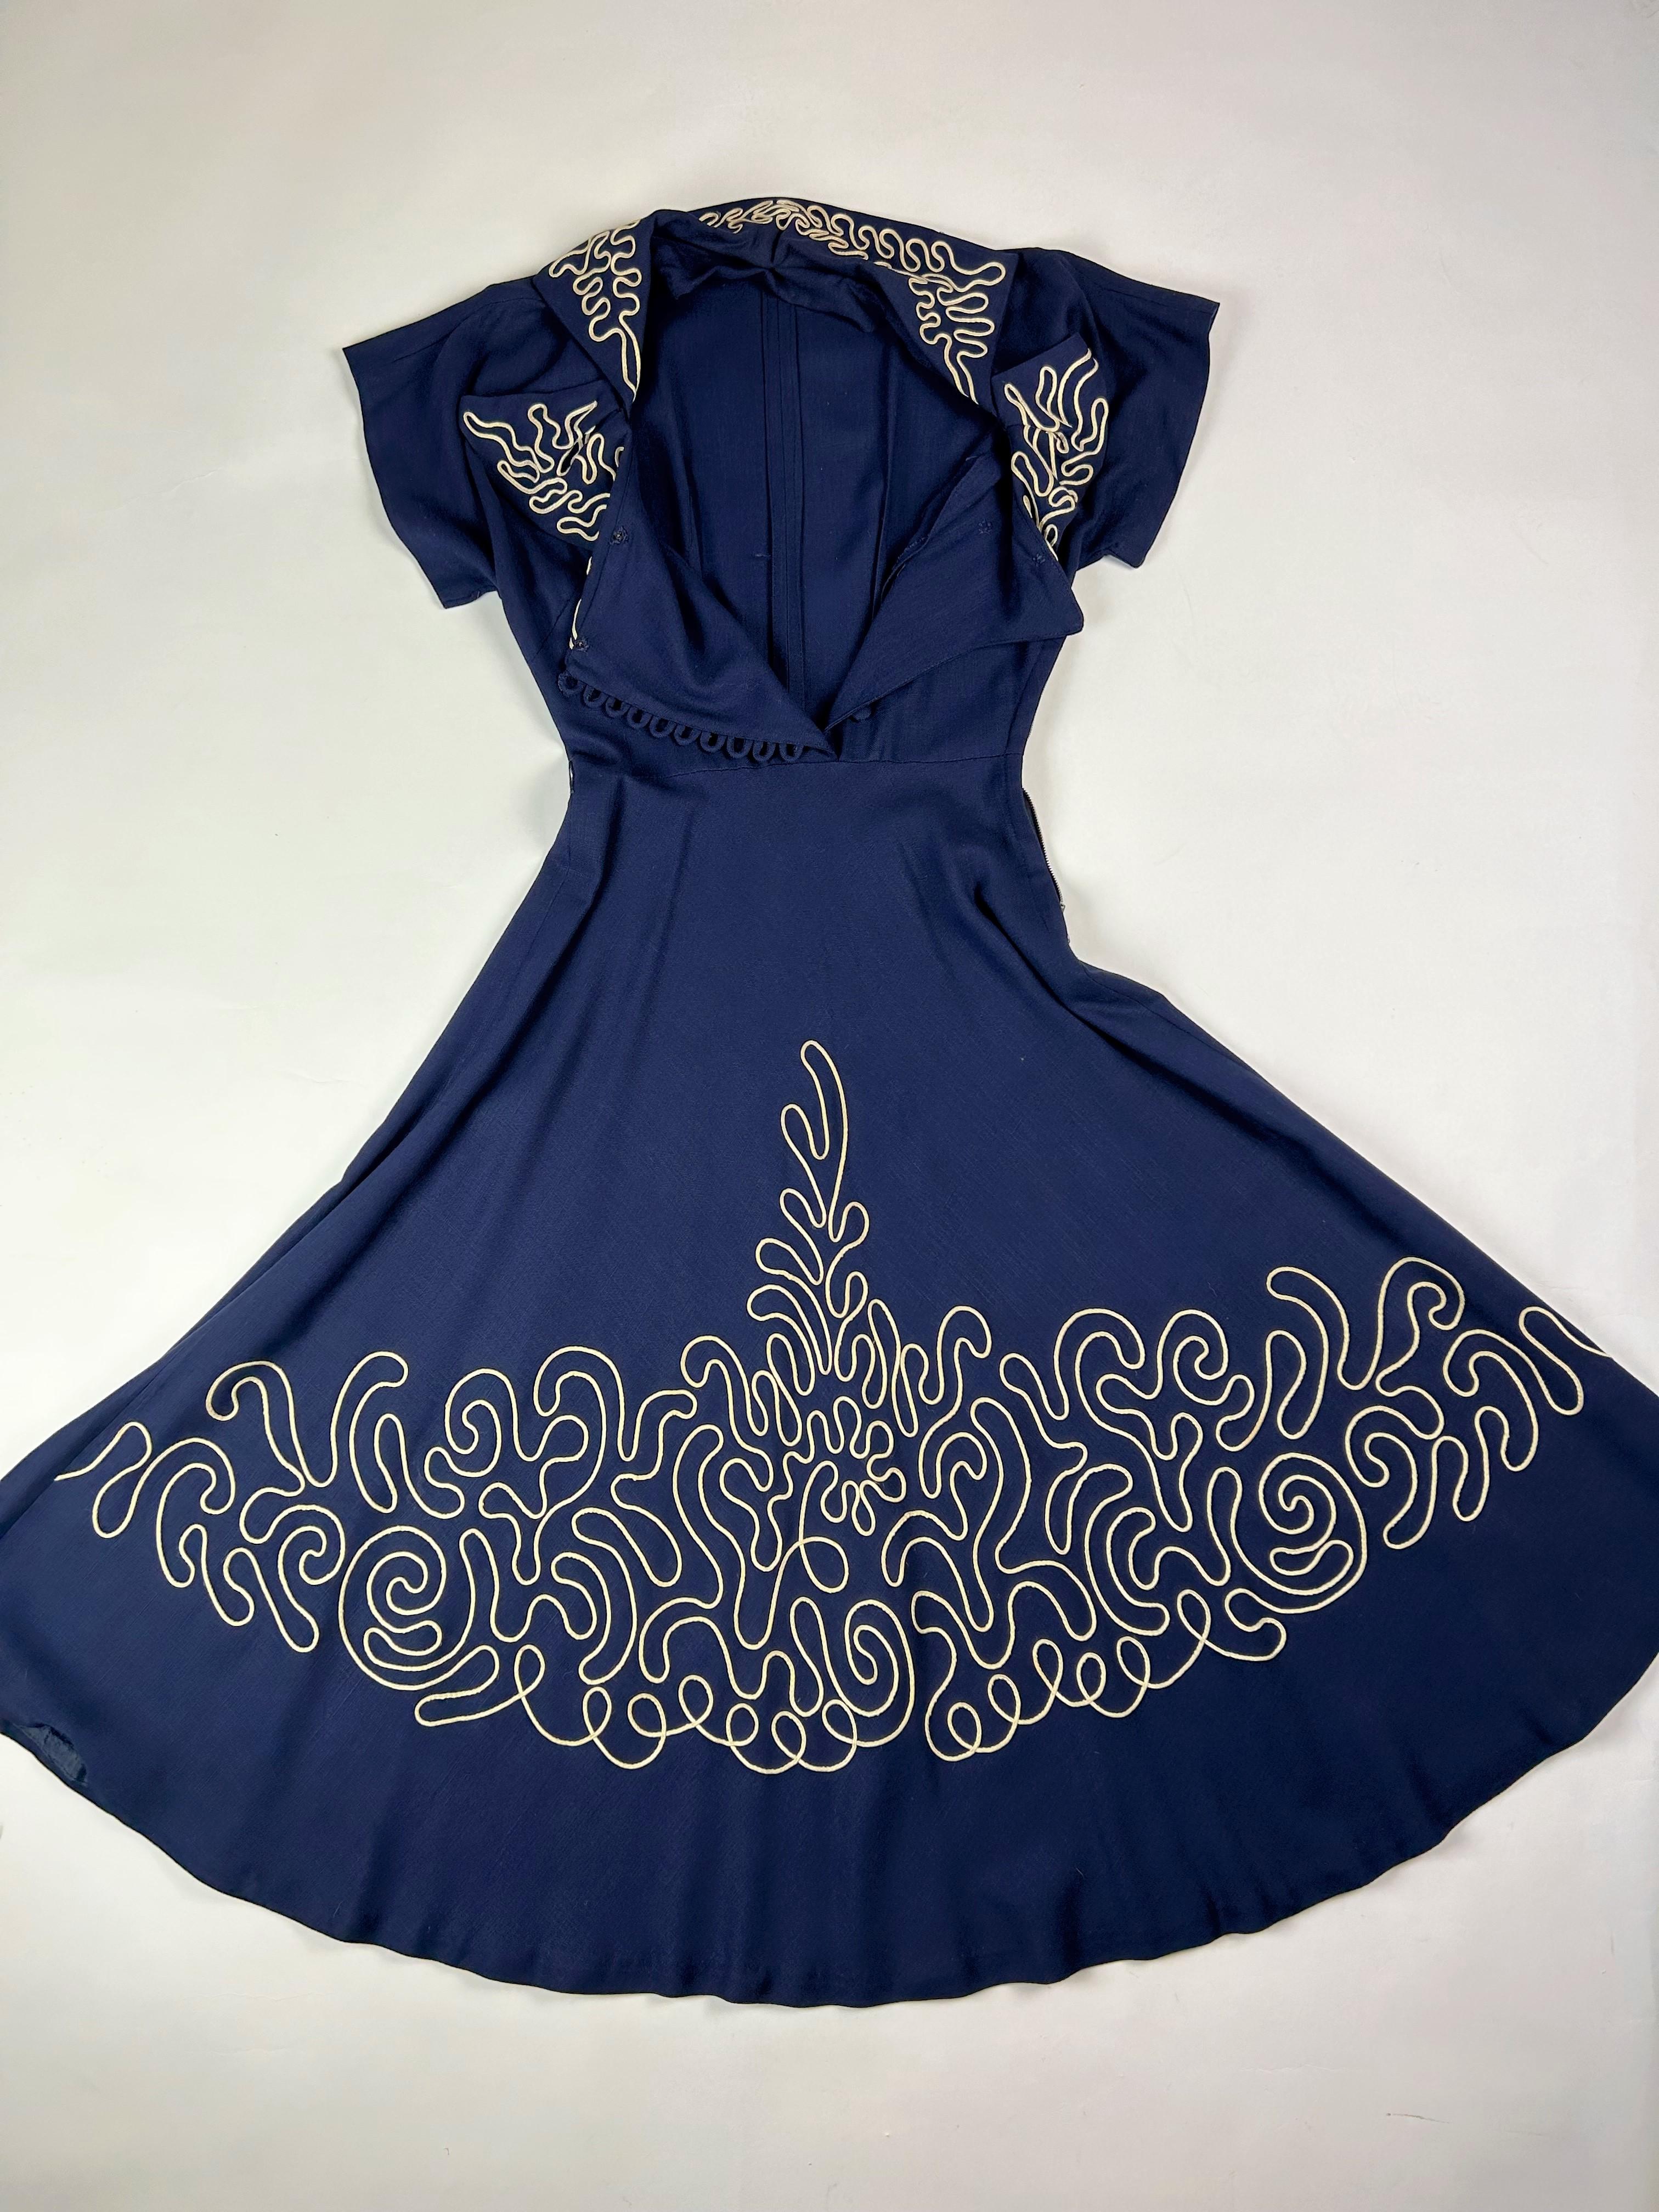 Women's A Navy French Day Dress with white piping appliqué Circa 1945-1950 For Sale